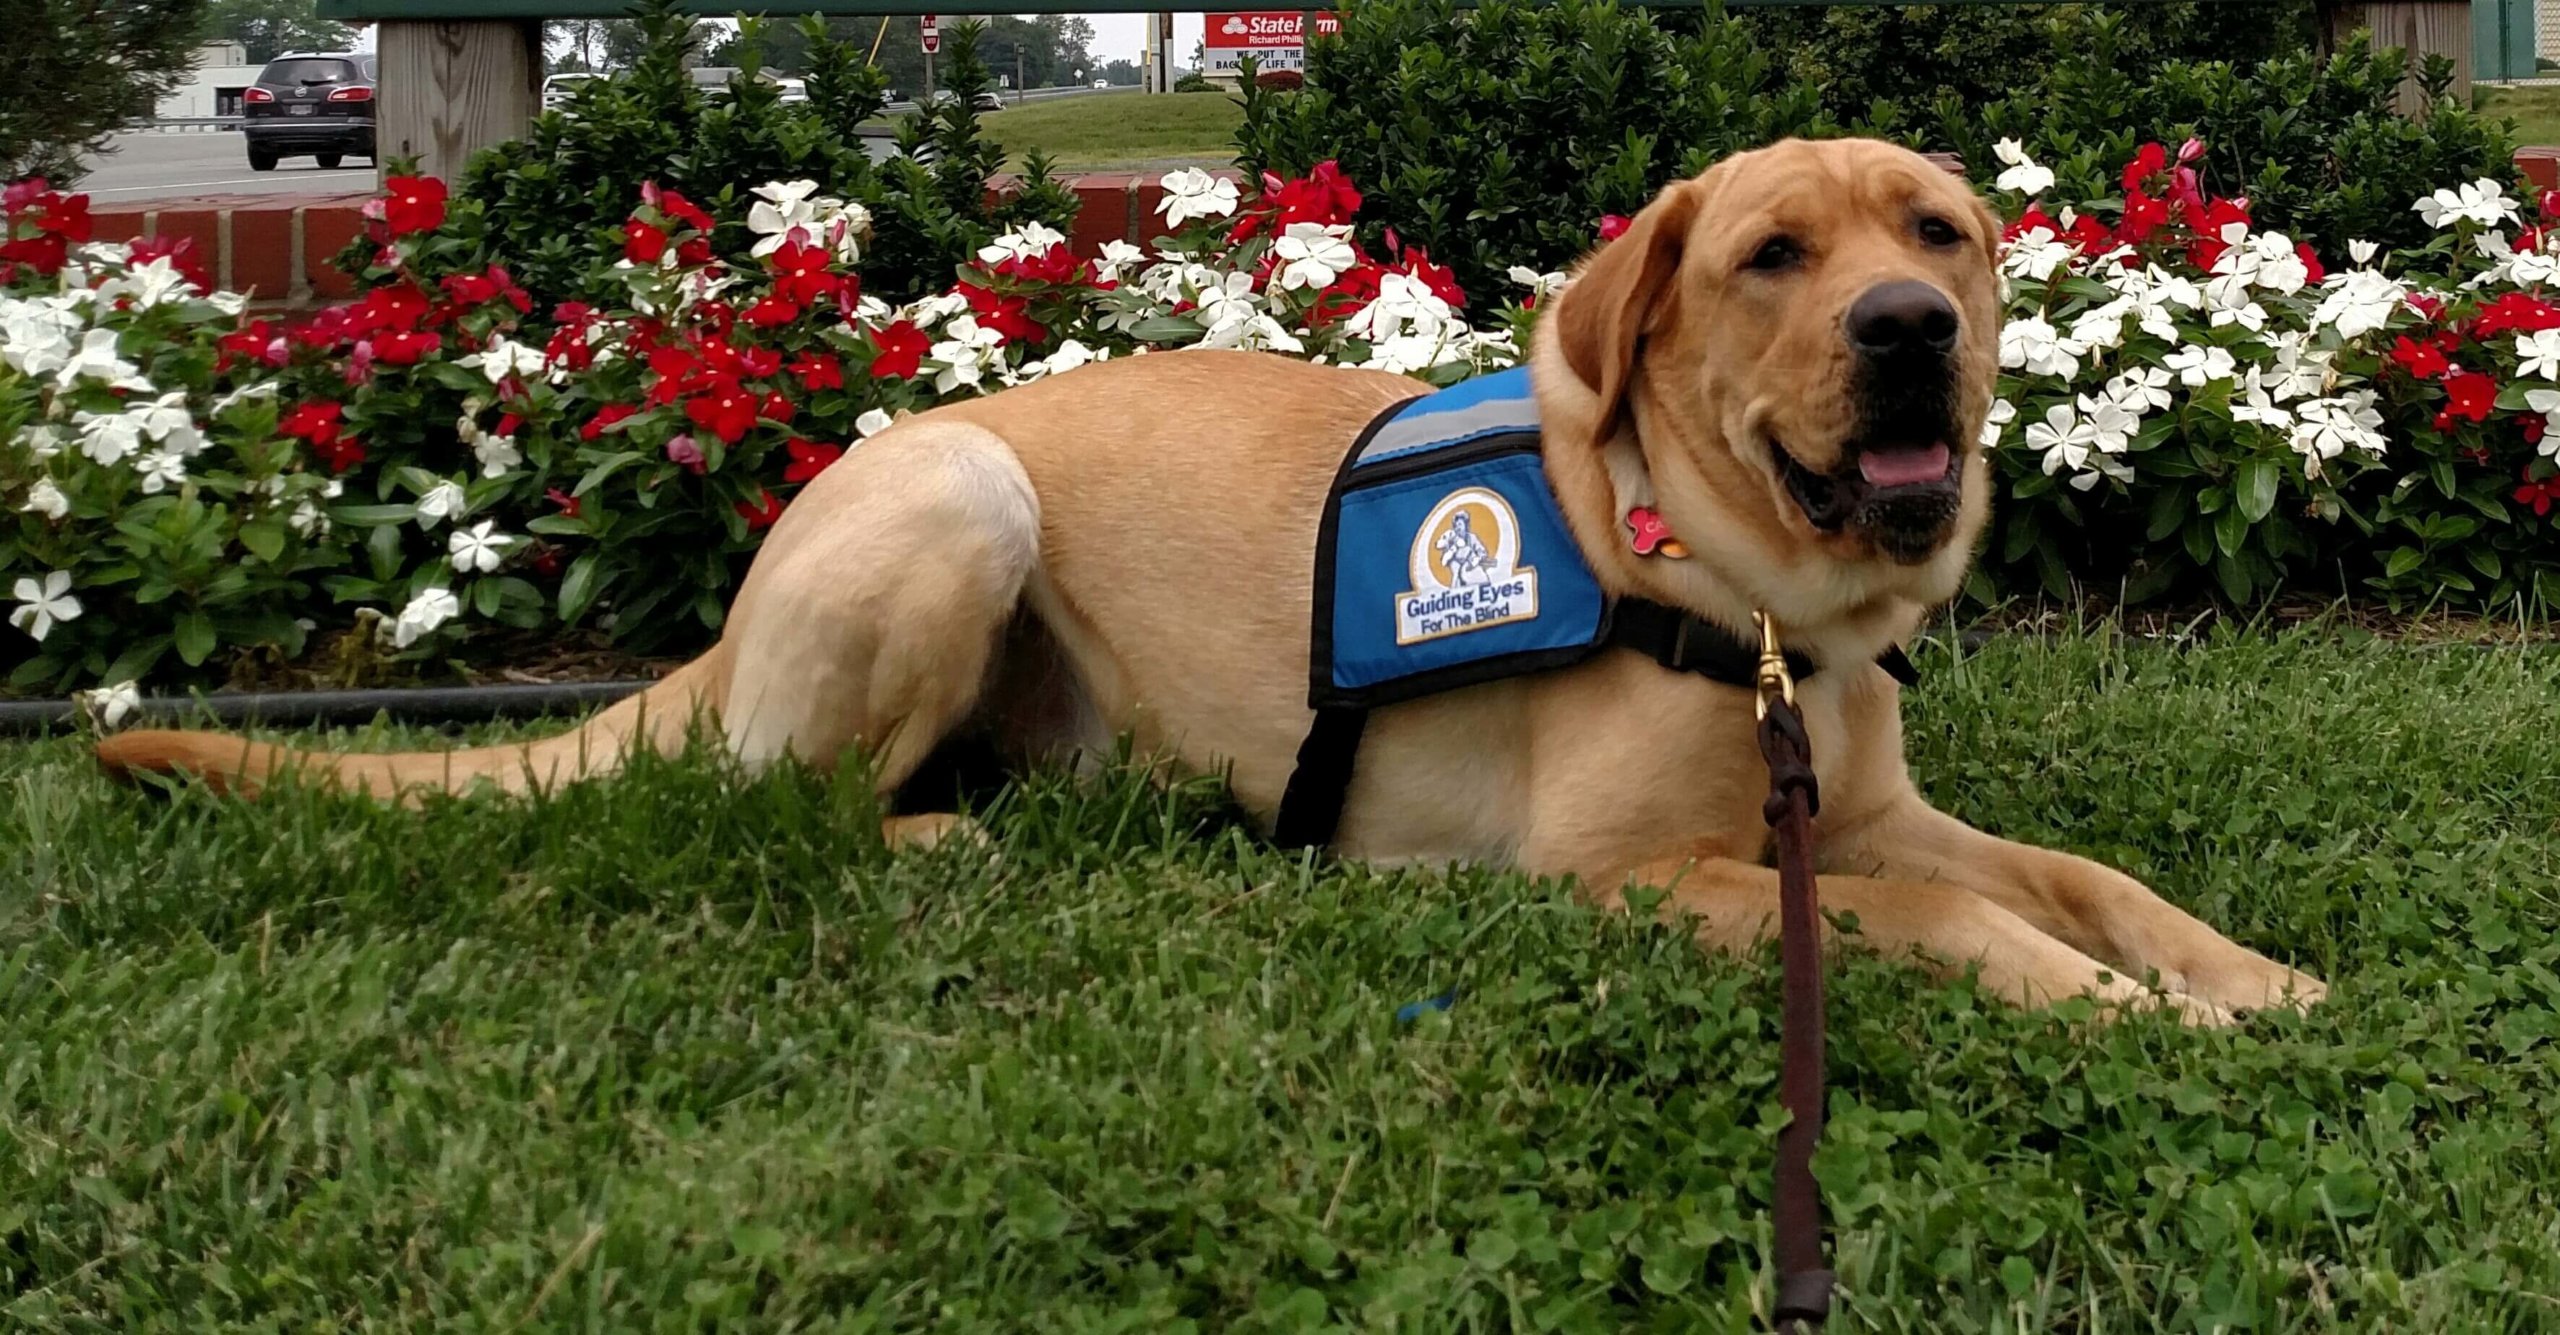 Casper, a yellow lab, wears his blue Guiding Eyes vest while laying in the grass with white and red flowers in the background.